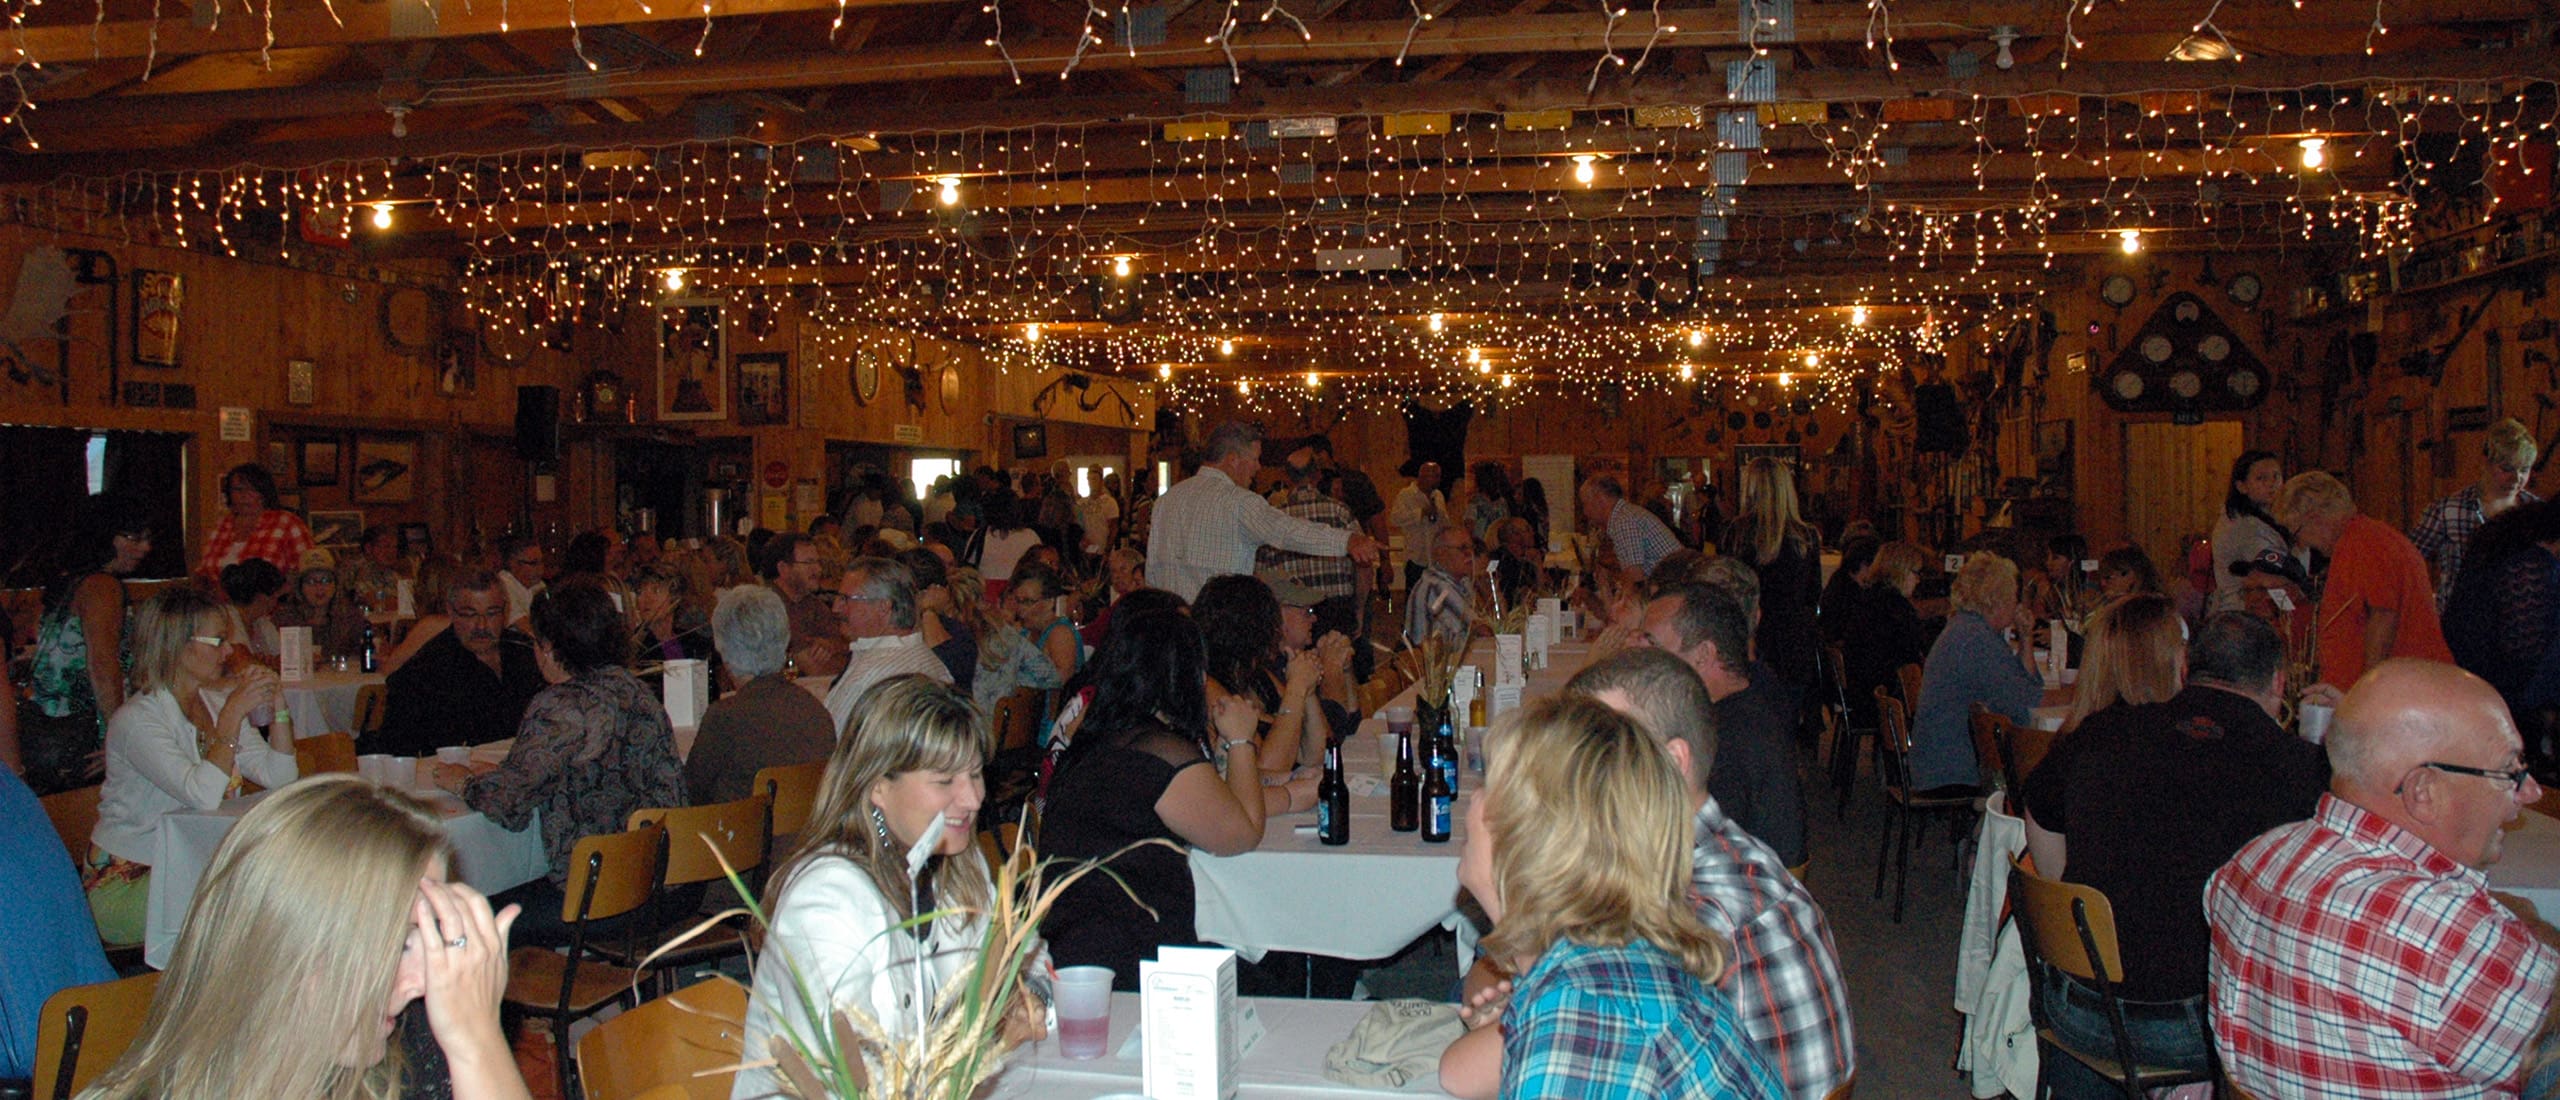 Chinook Drakes Ducks Unlimited Banquet and Auction